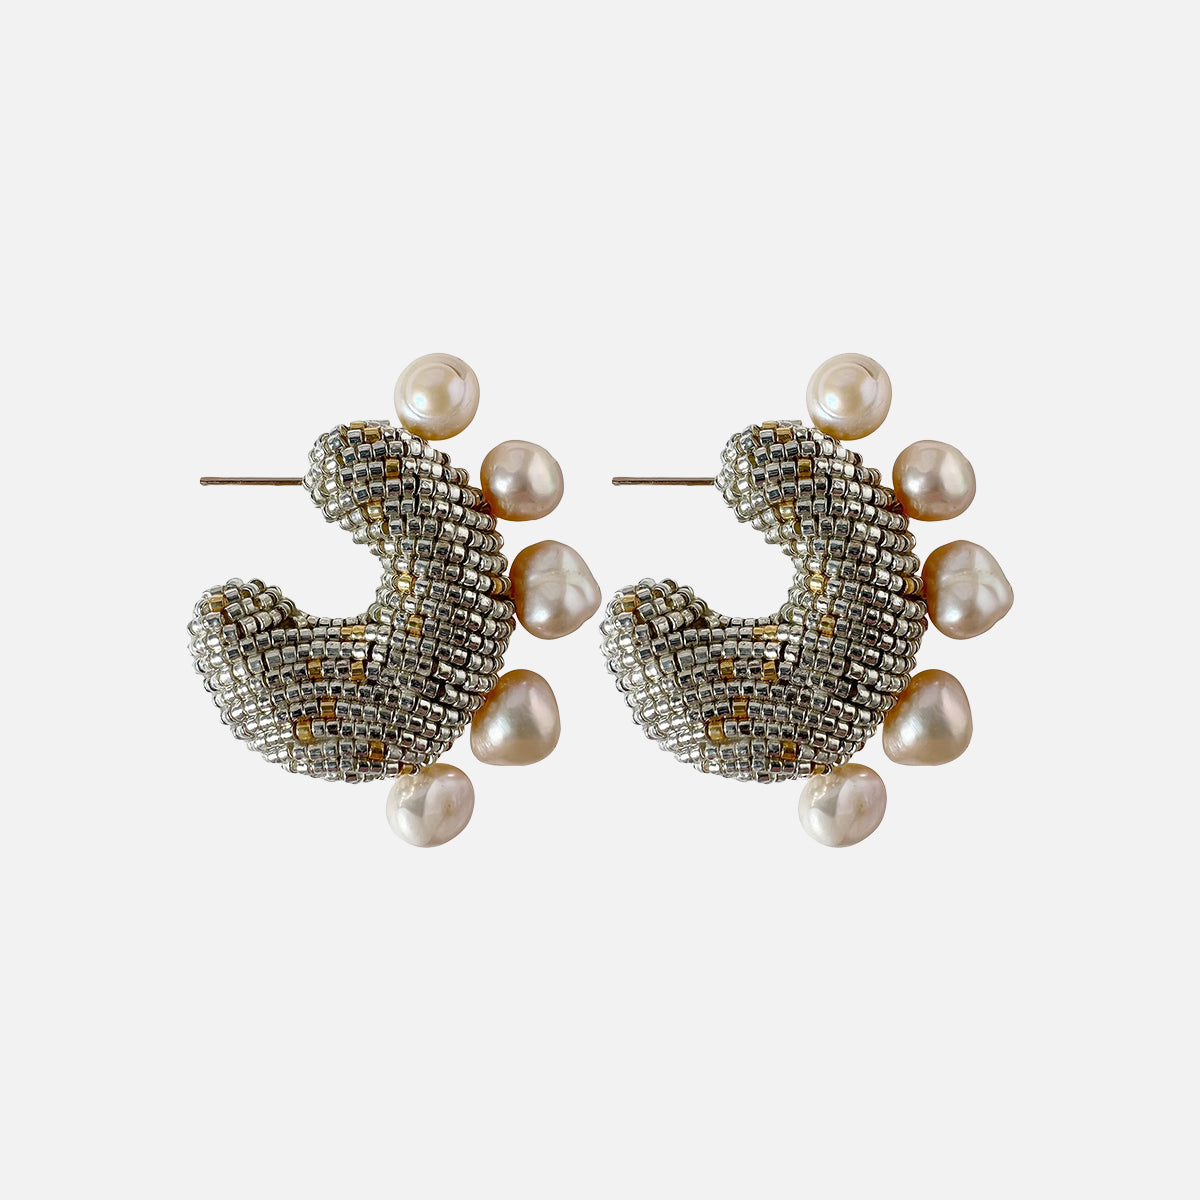 Solito Pearled Earrings, Silver